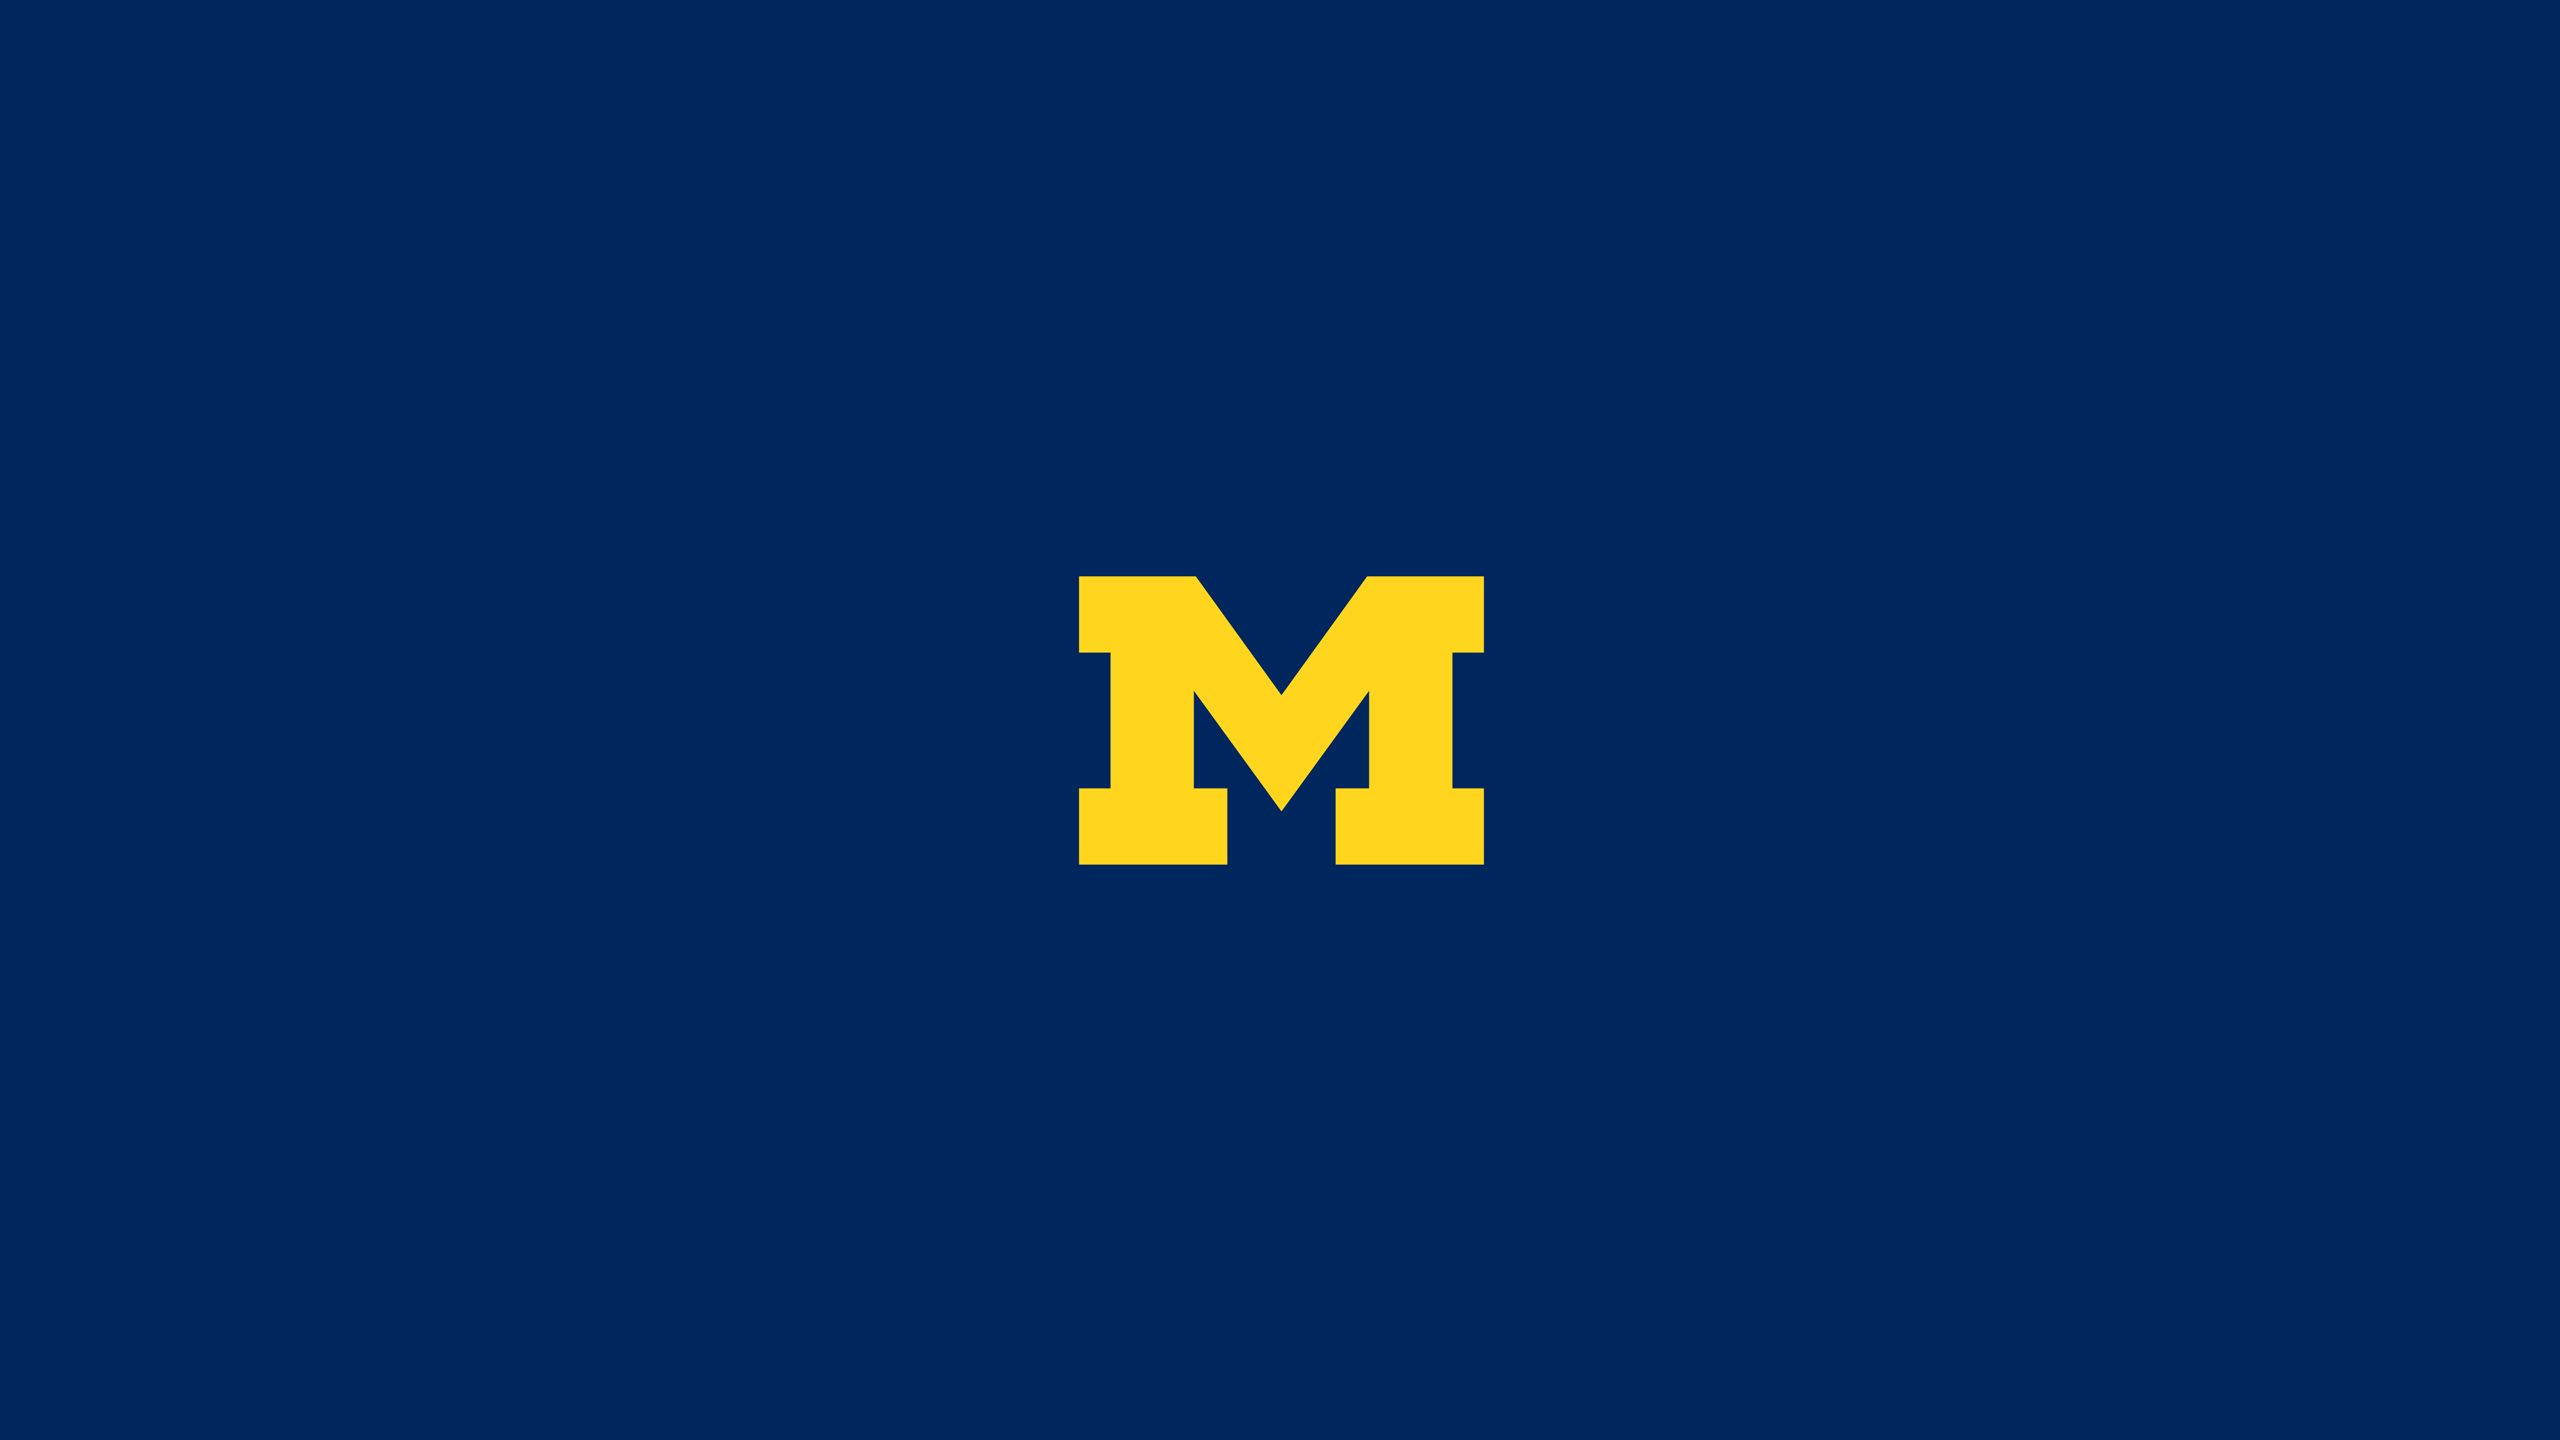 Michigan Wolverines Football - NCAAF - Square Bettor